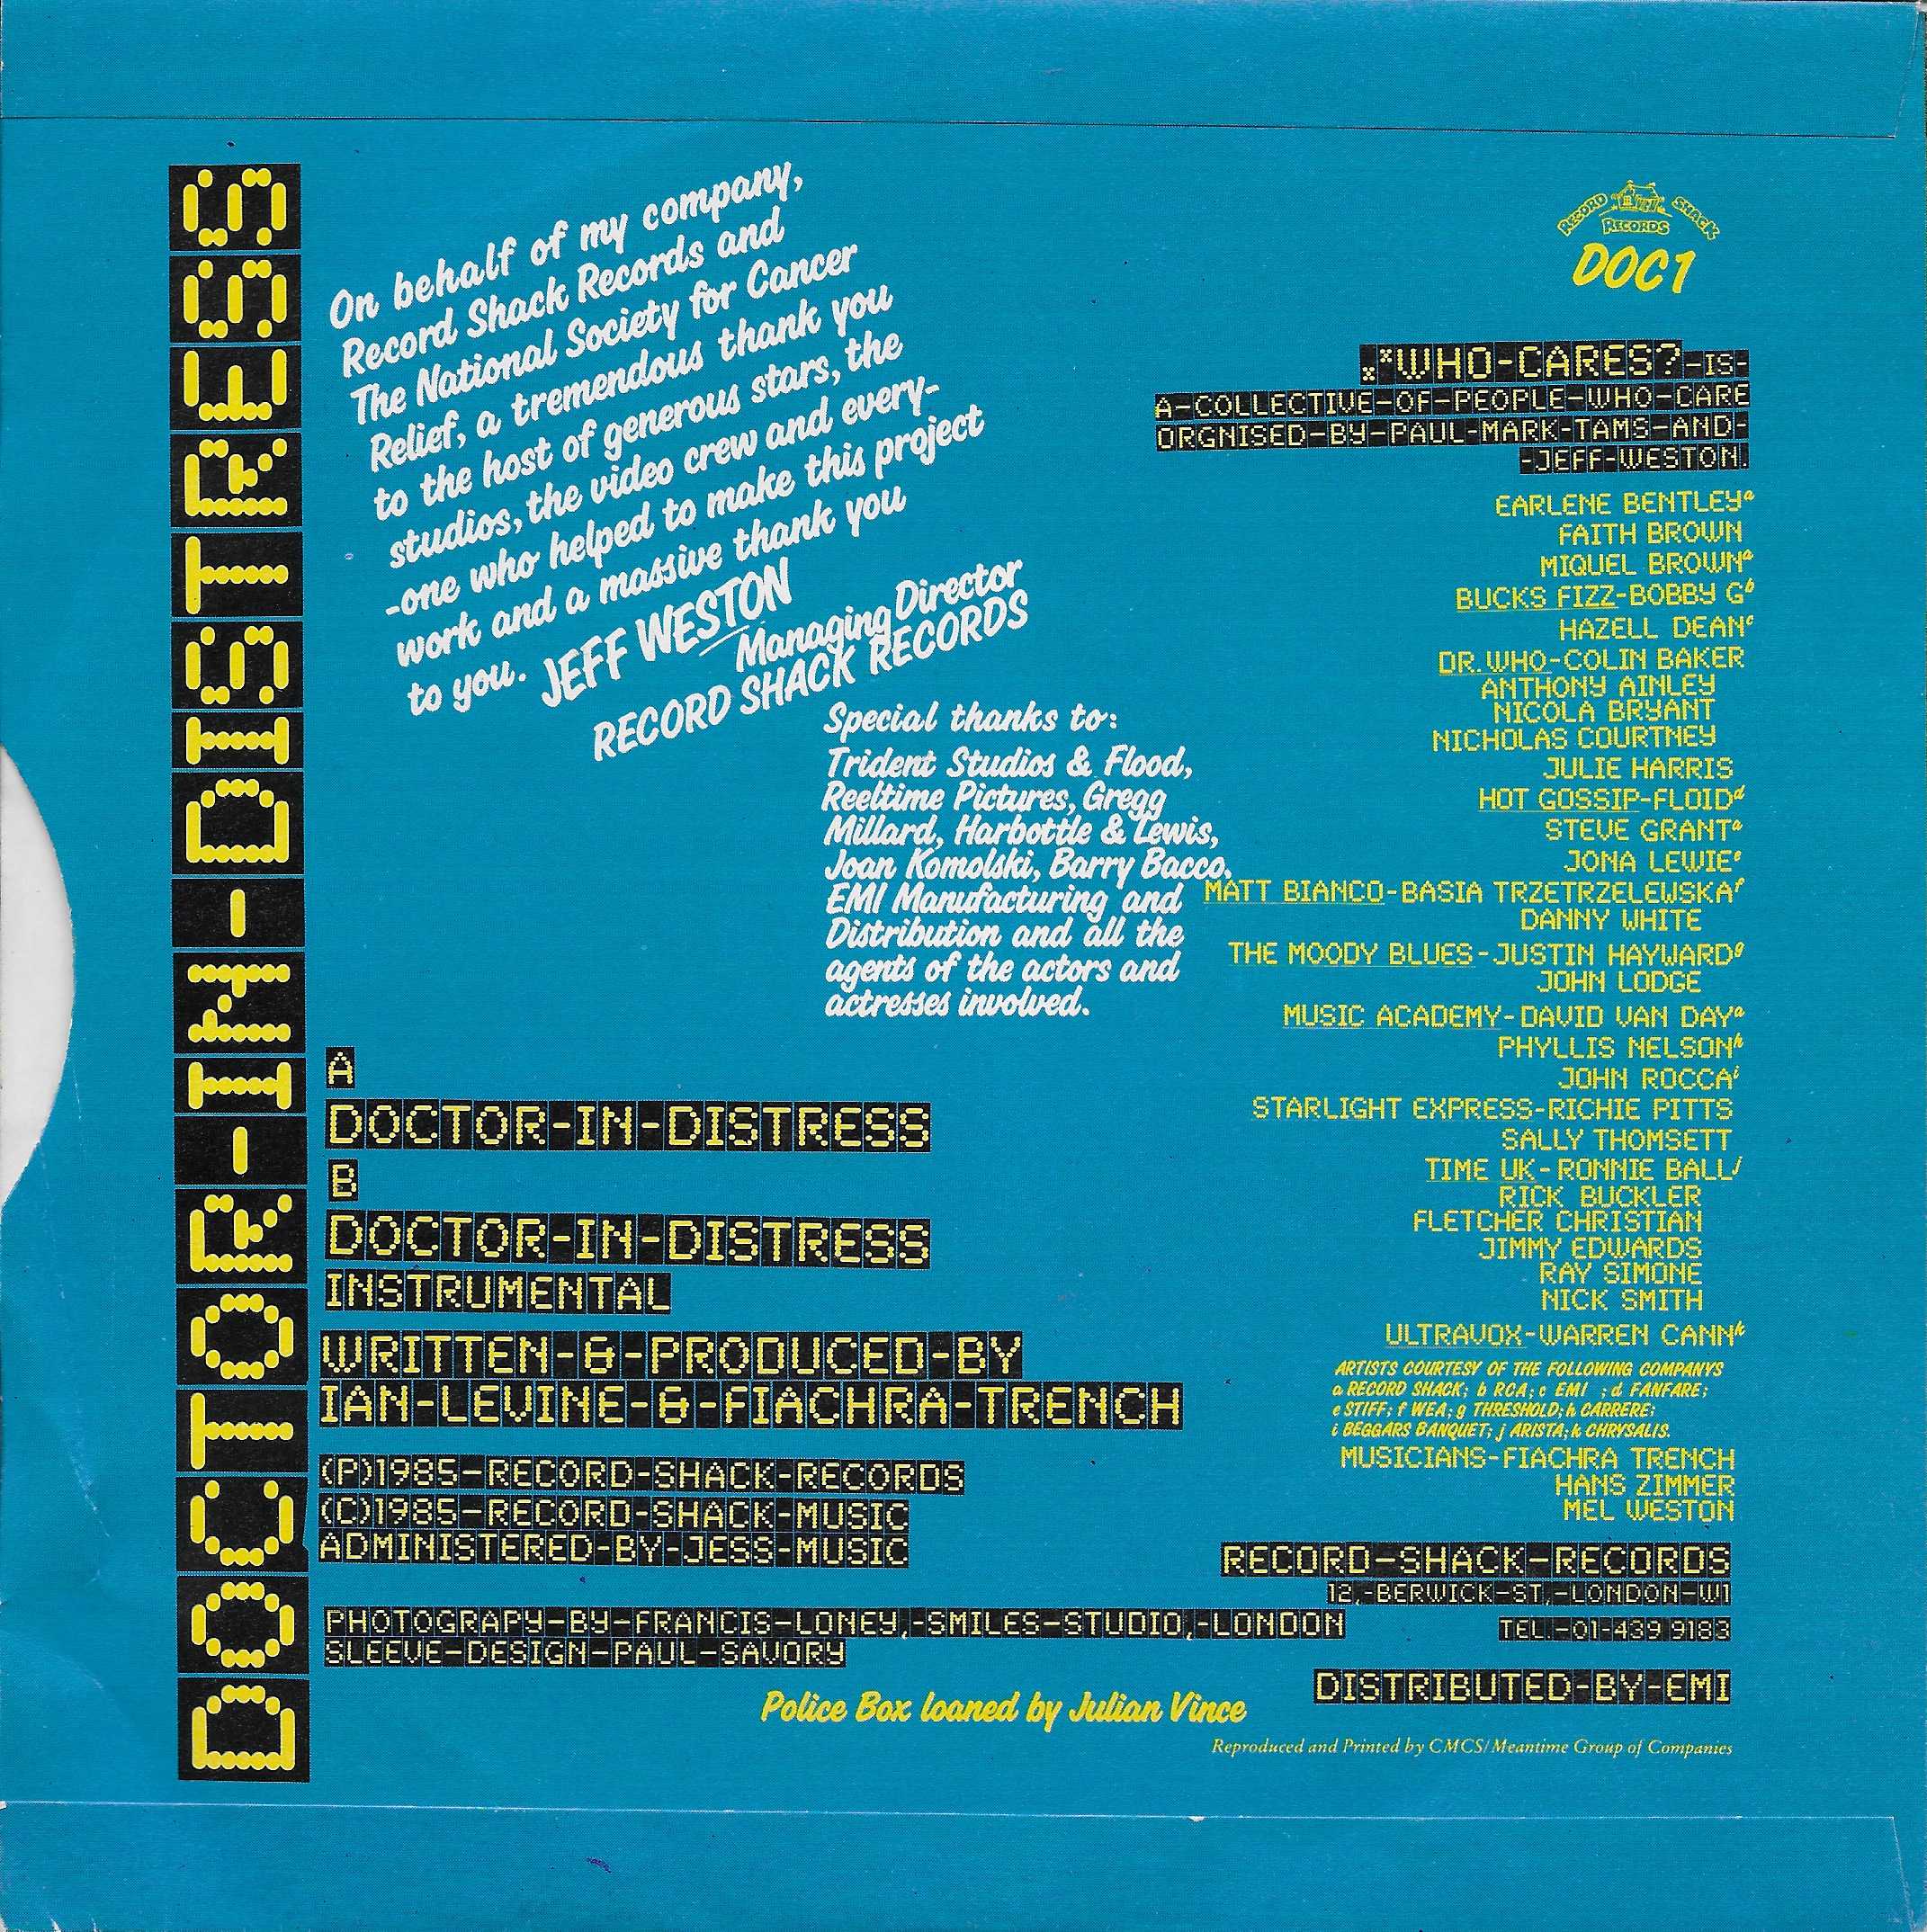 Picture of DOC 1 Doctor in distress by artist Ian Levine / Flachra Trench from the BBC records and Tapes library